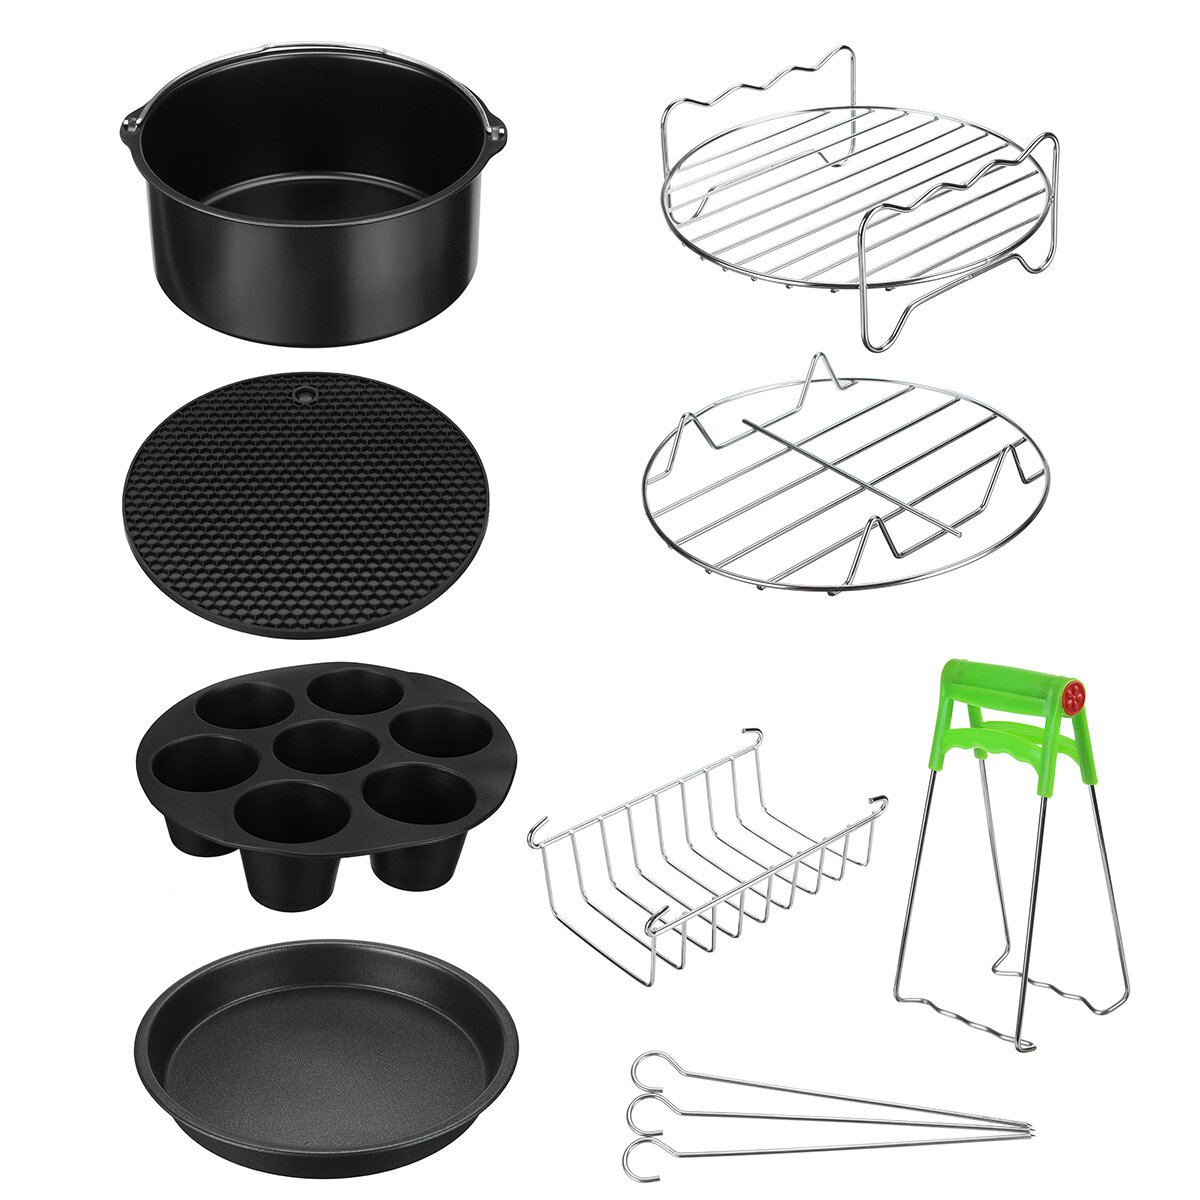 7/8 Inch Air Fryer Accessories Baking Basket Pizza Pan Home Kitchen Tools